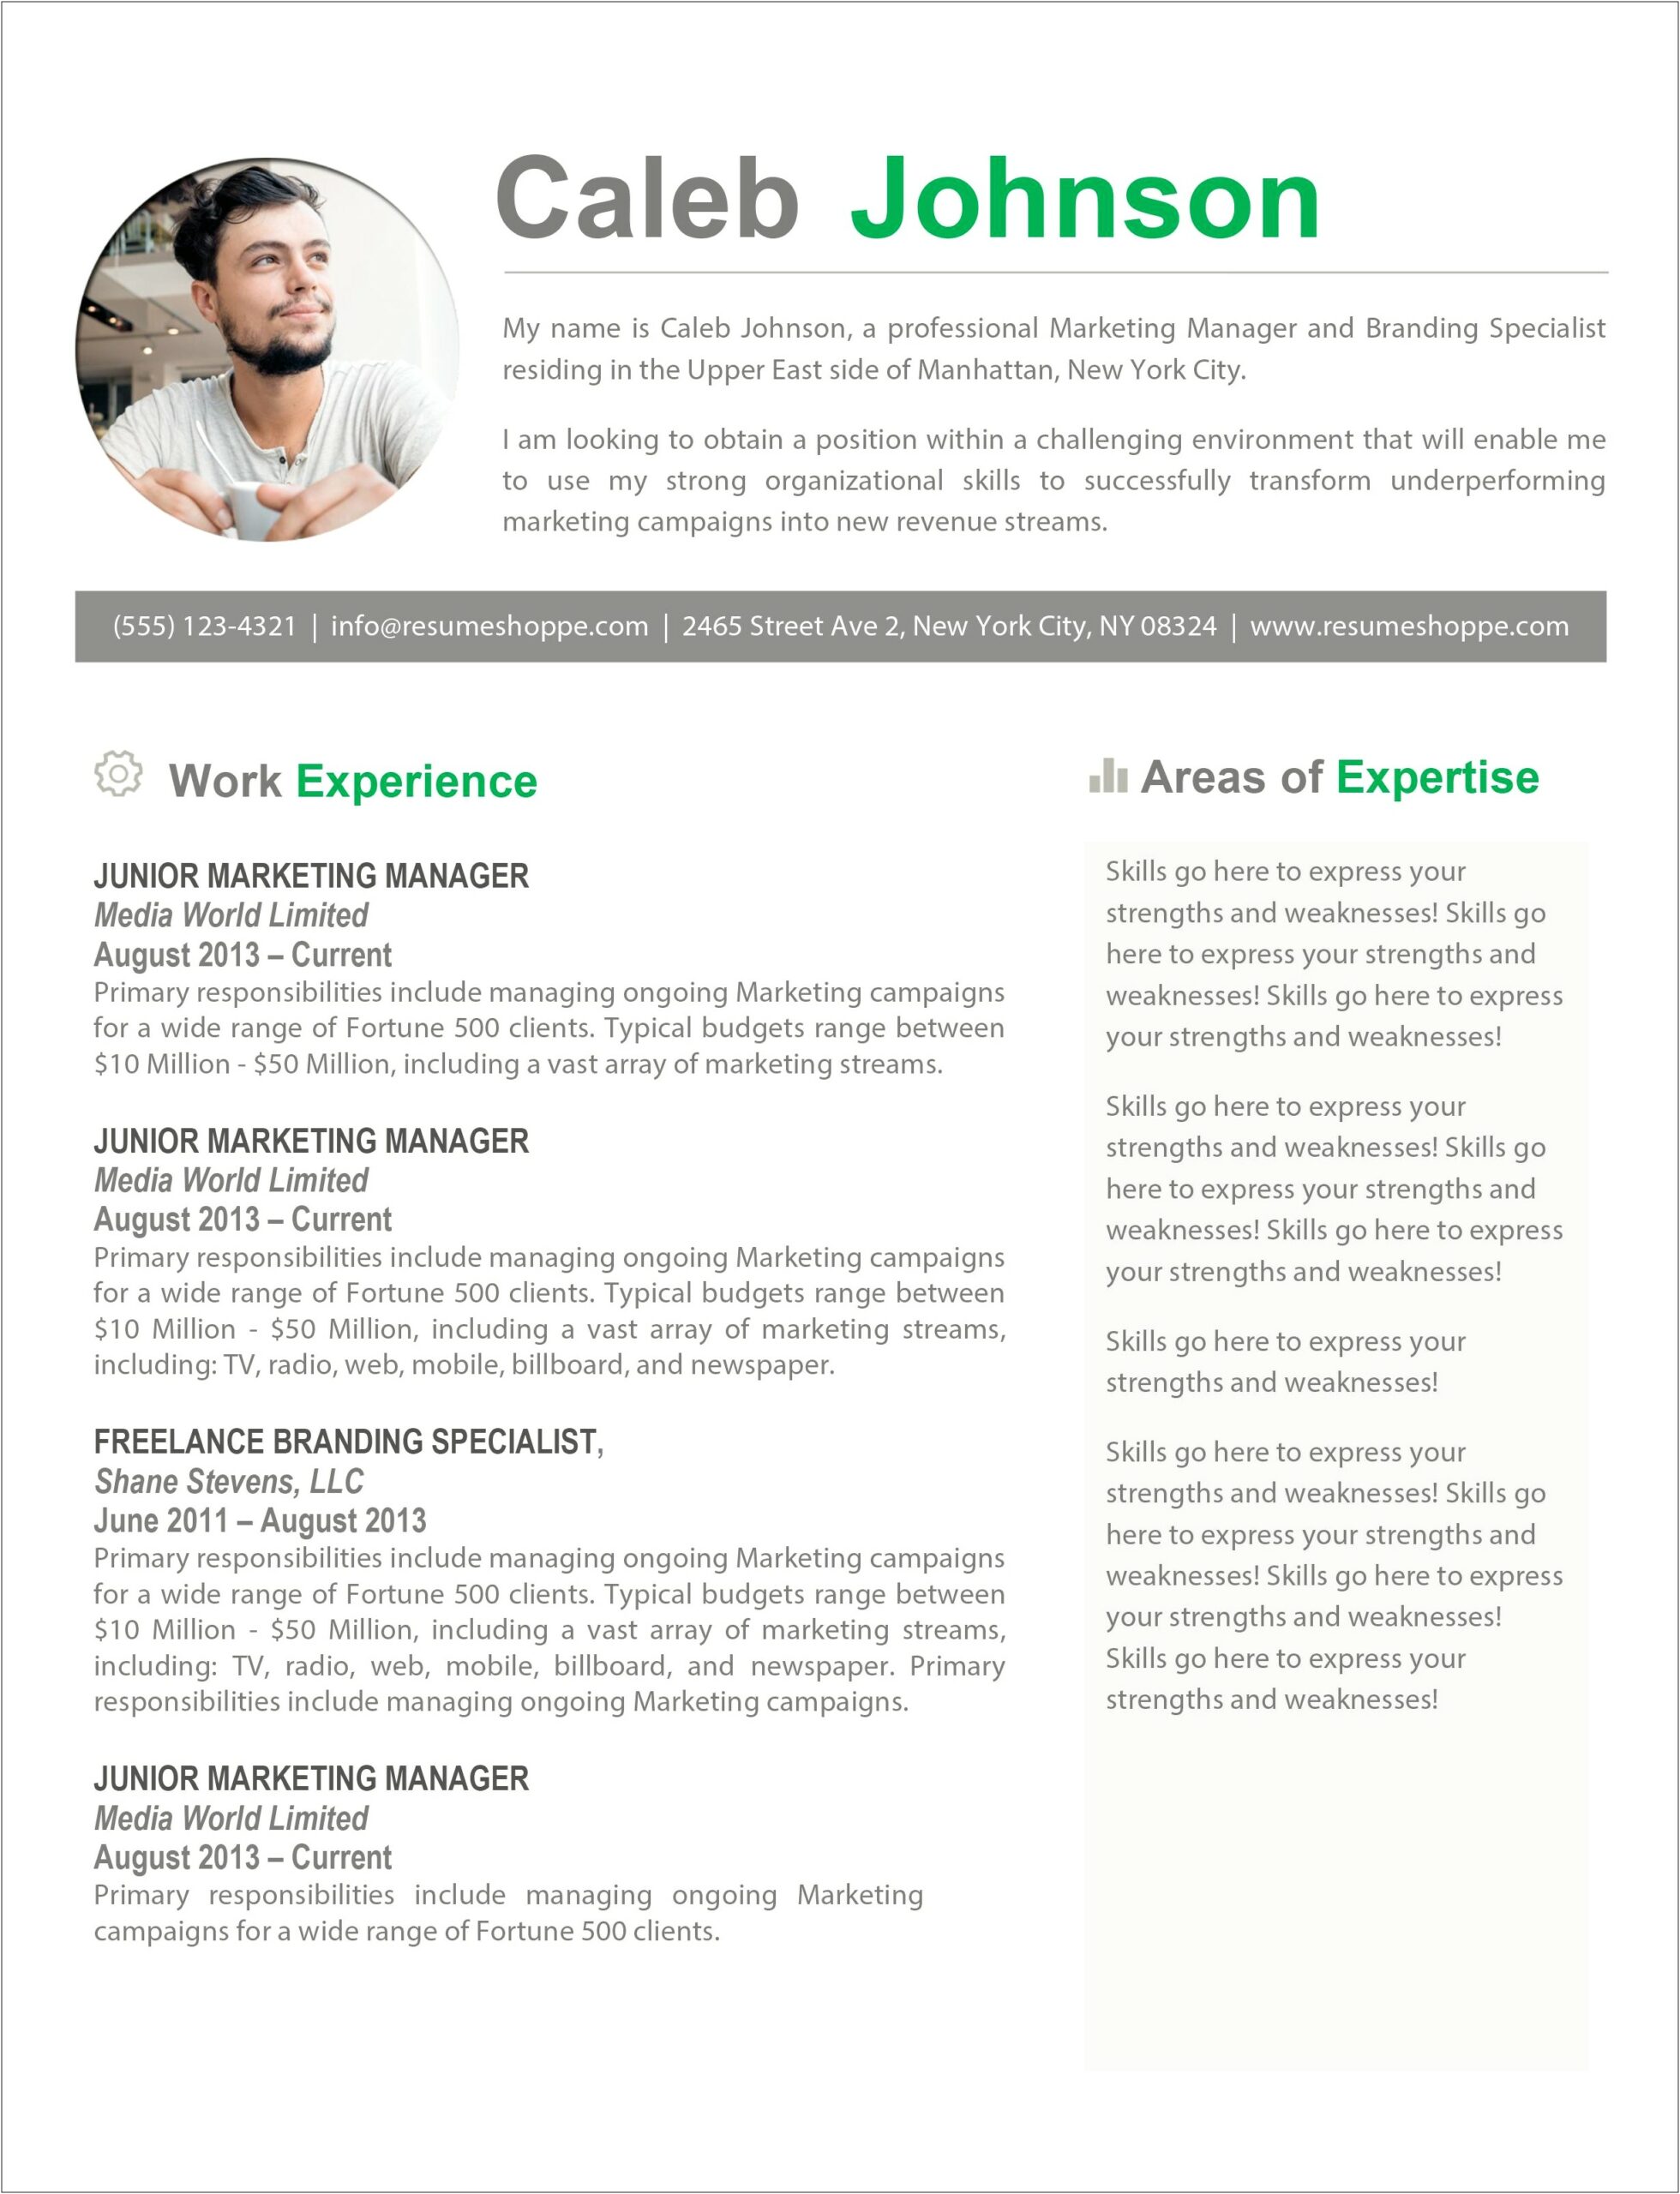 Resume Examples Strengths And Weaknesses